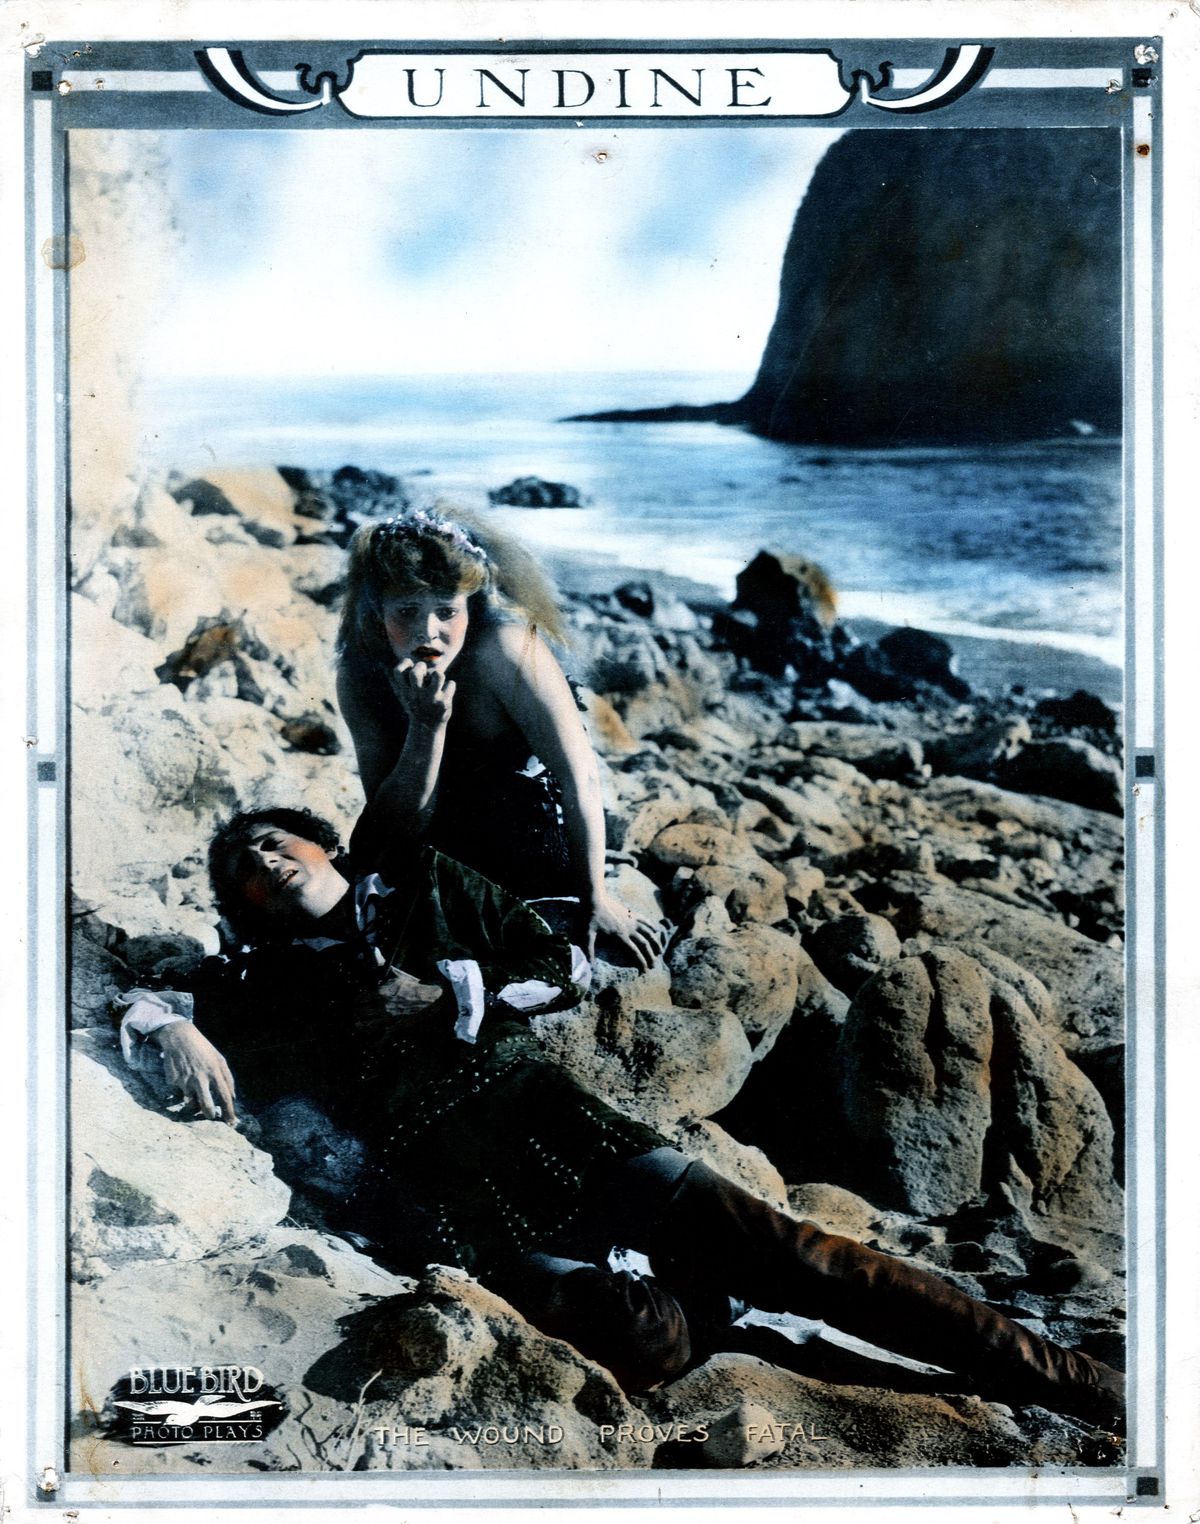 An antique colorized photo shows a young woman crouched over the body of a man, among rocks at the edge of the sea.